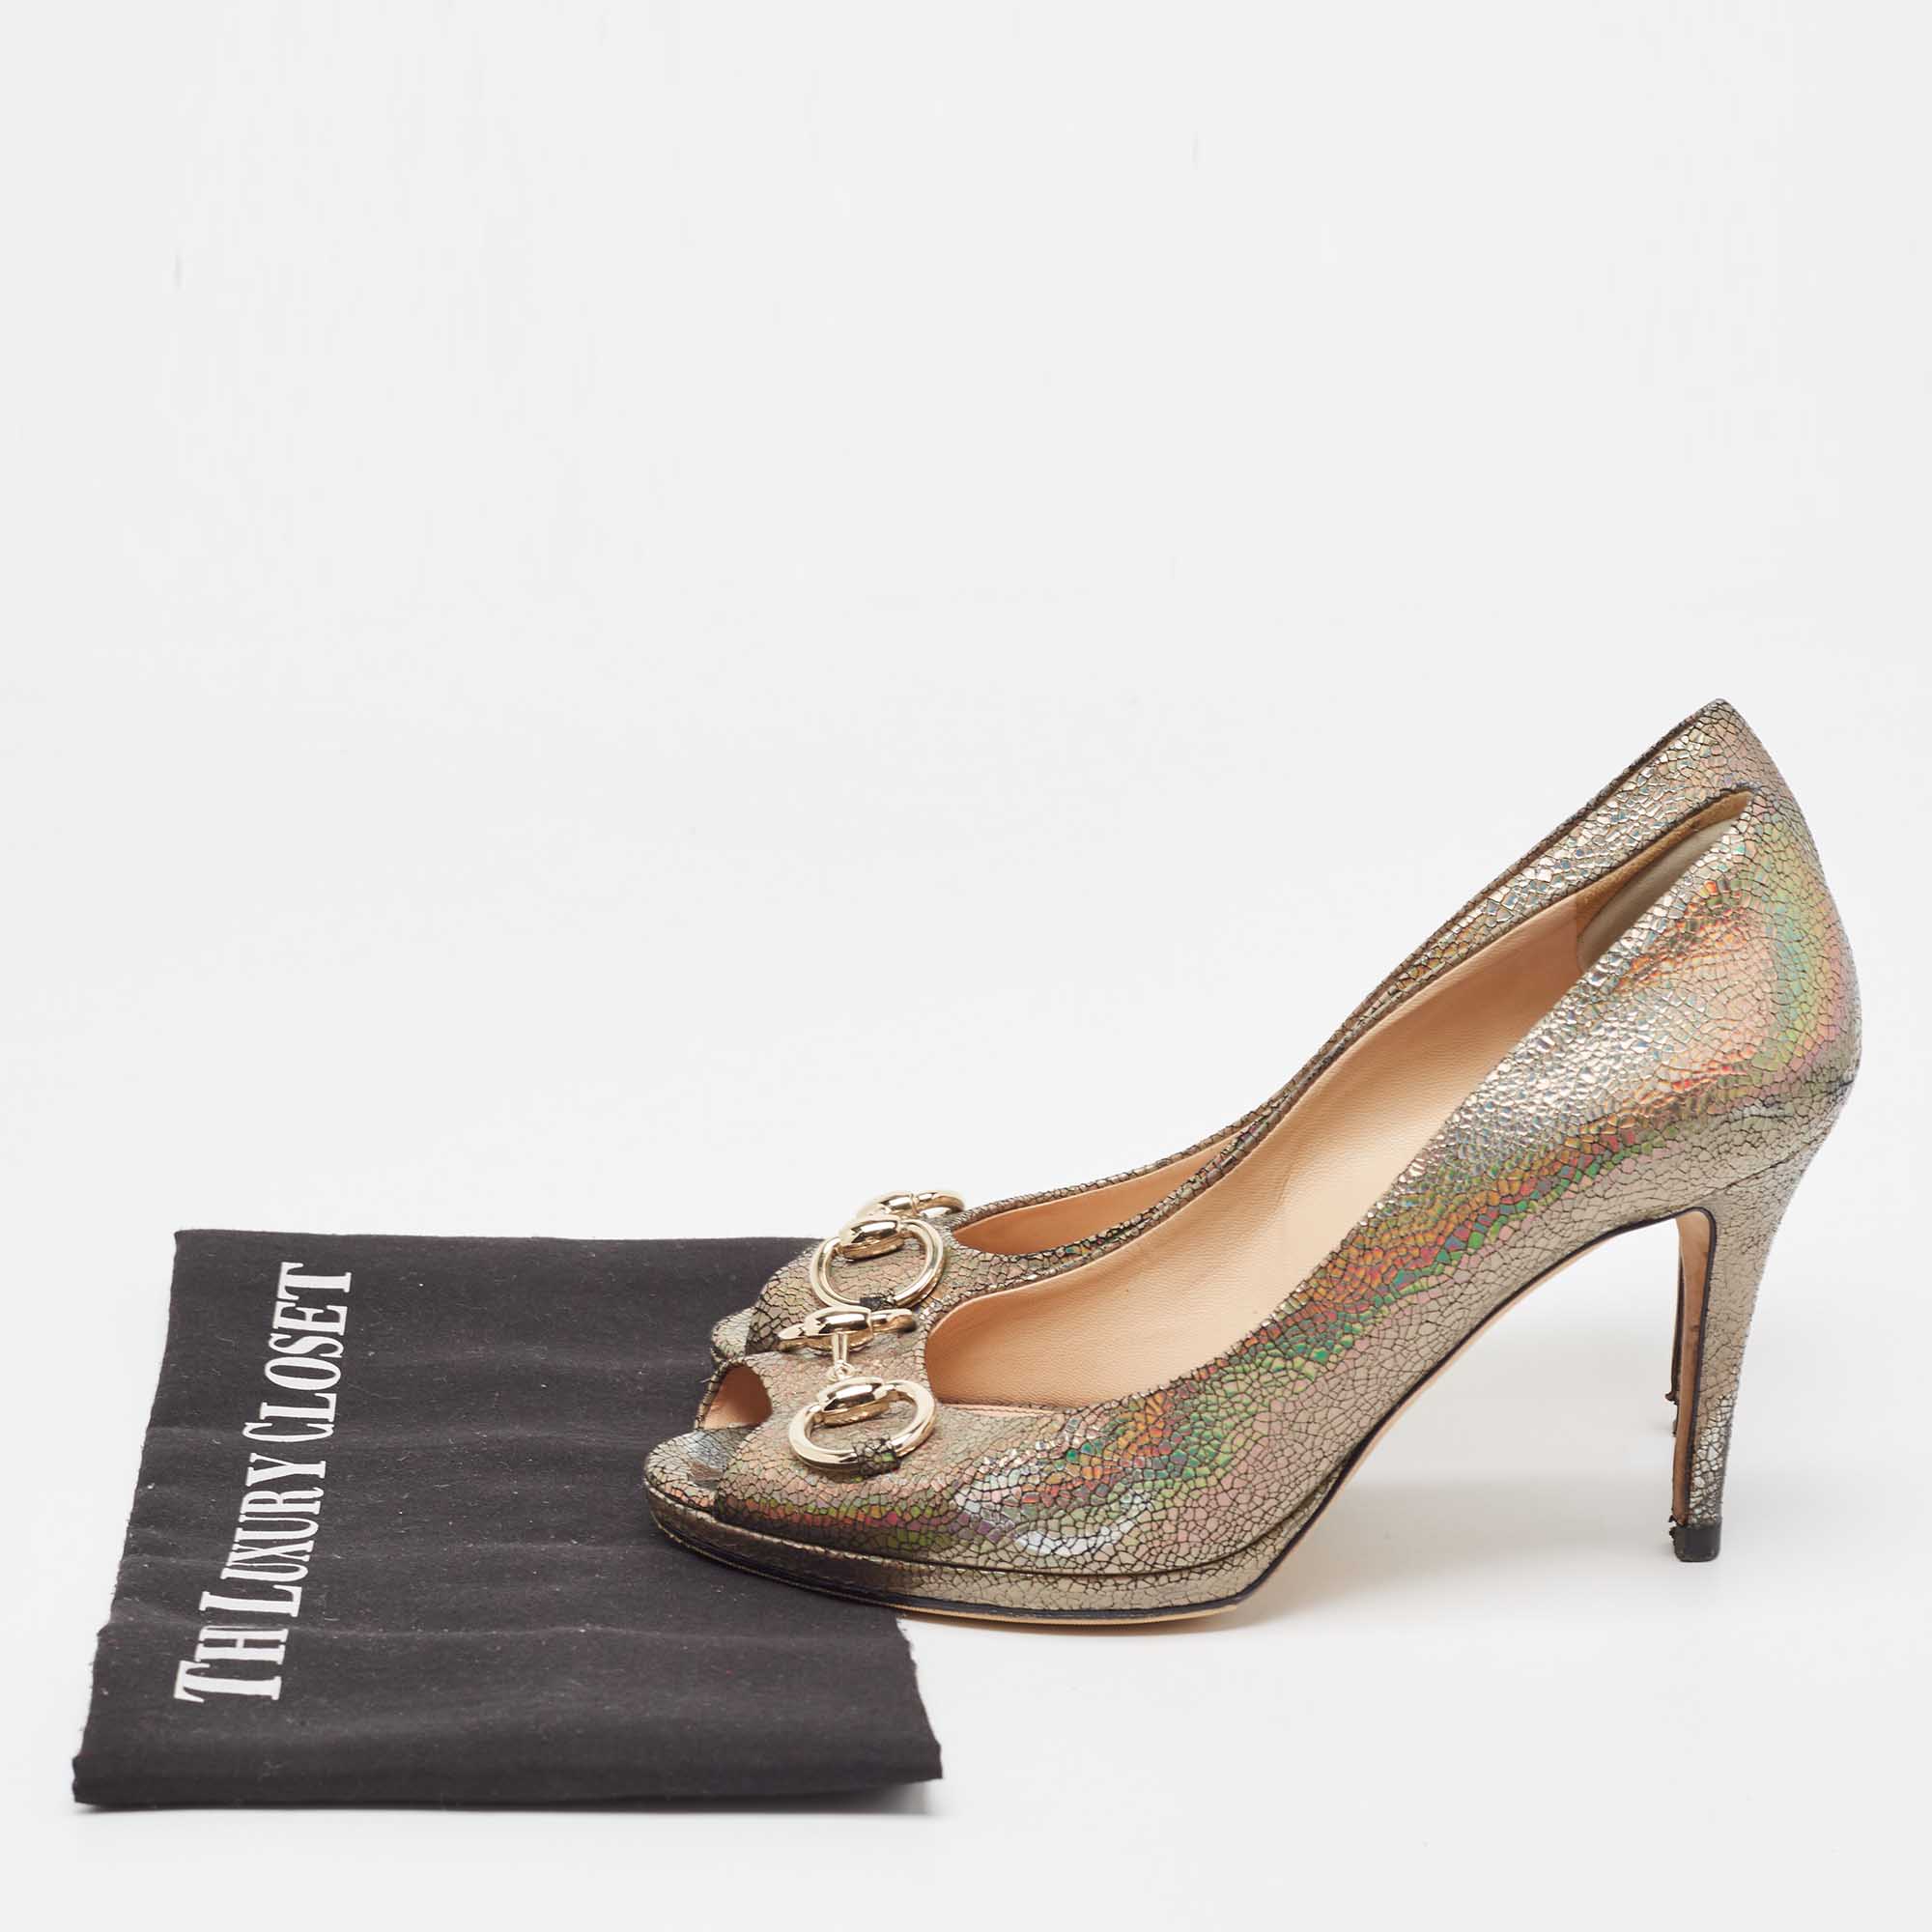 Gucci Metallic Laminated Suede New Hollywood Platform Pumps Size 38.5